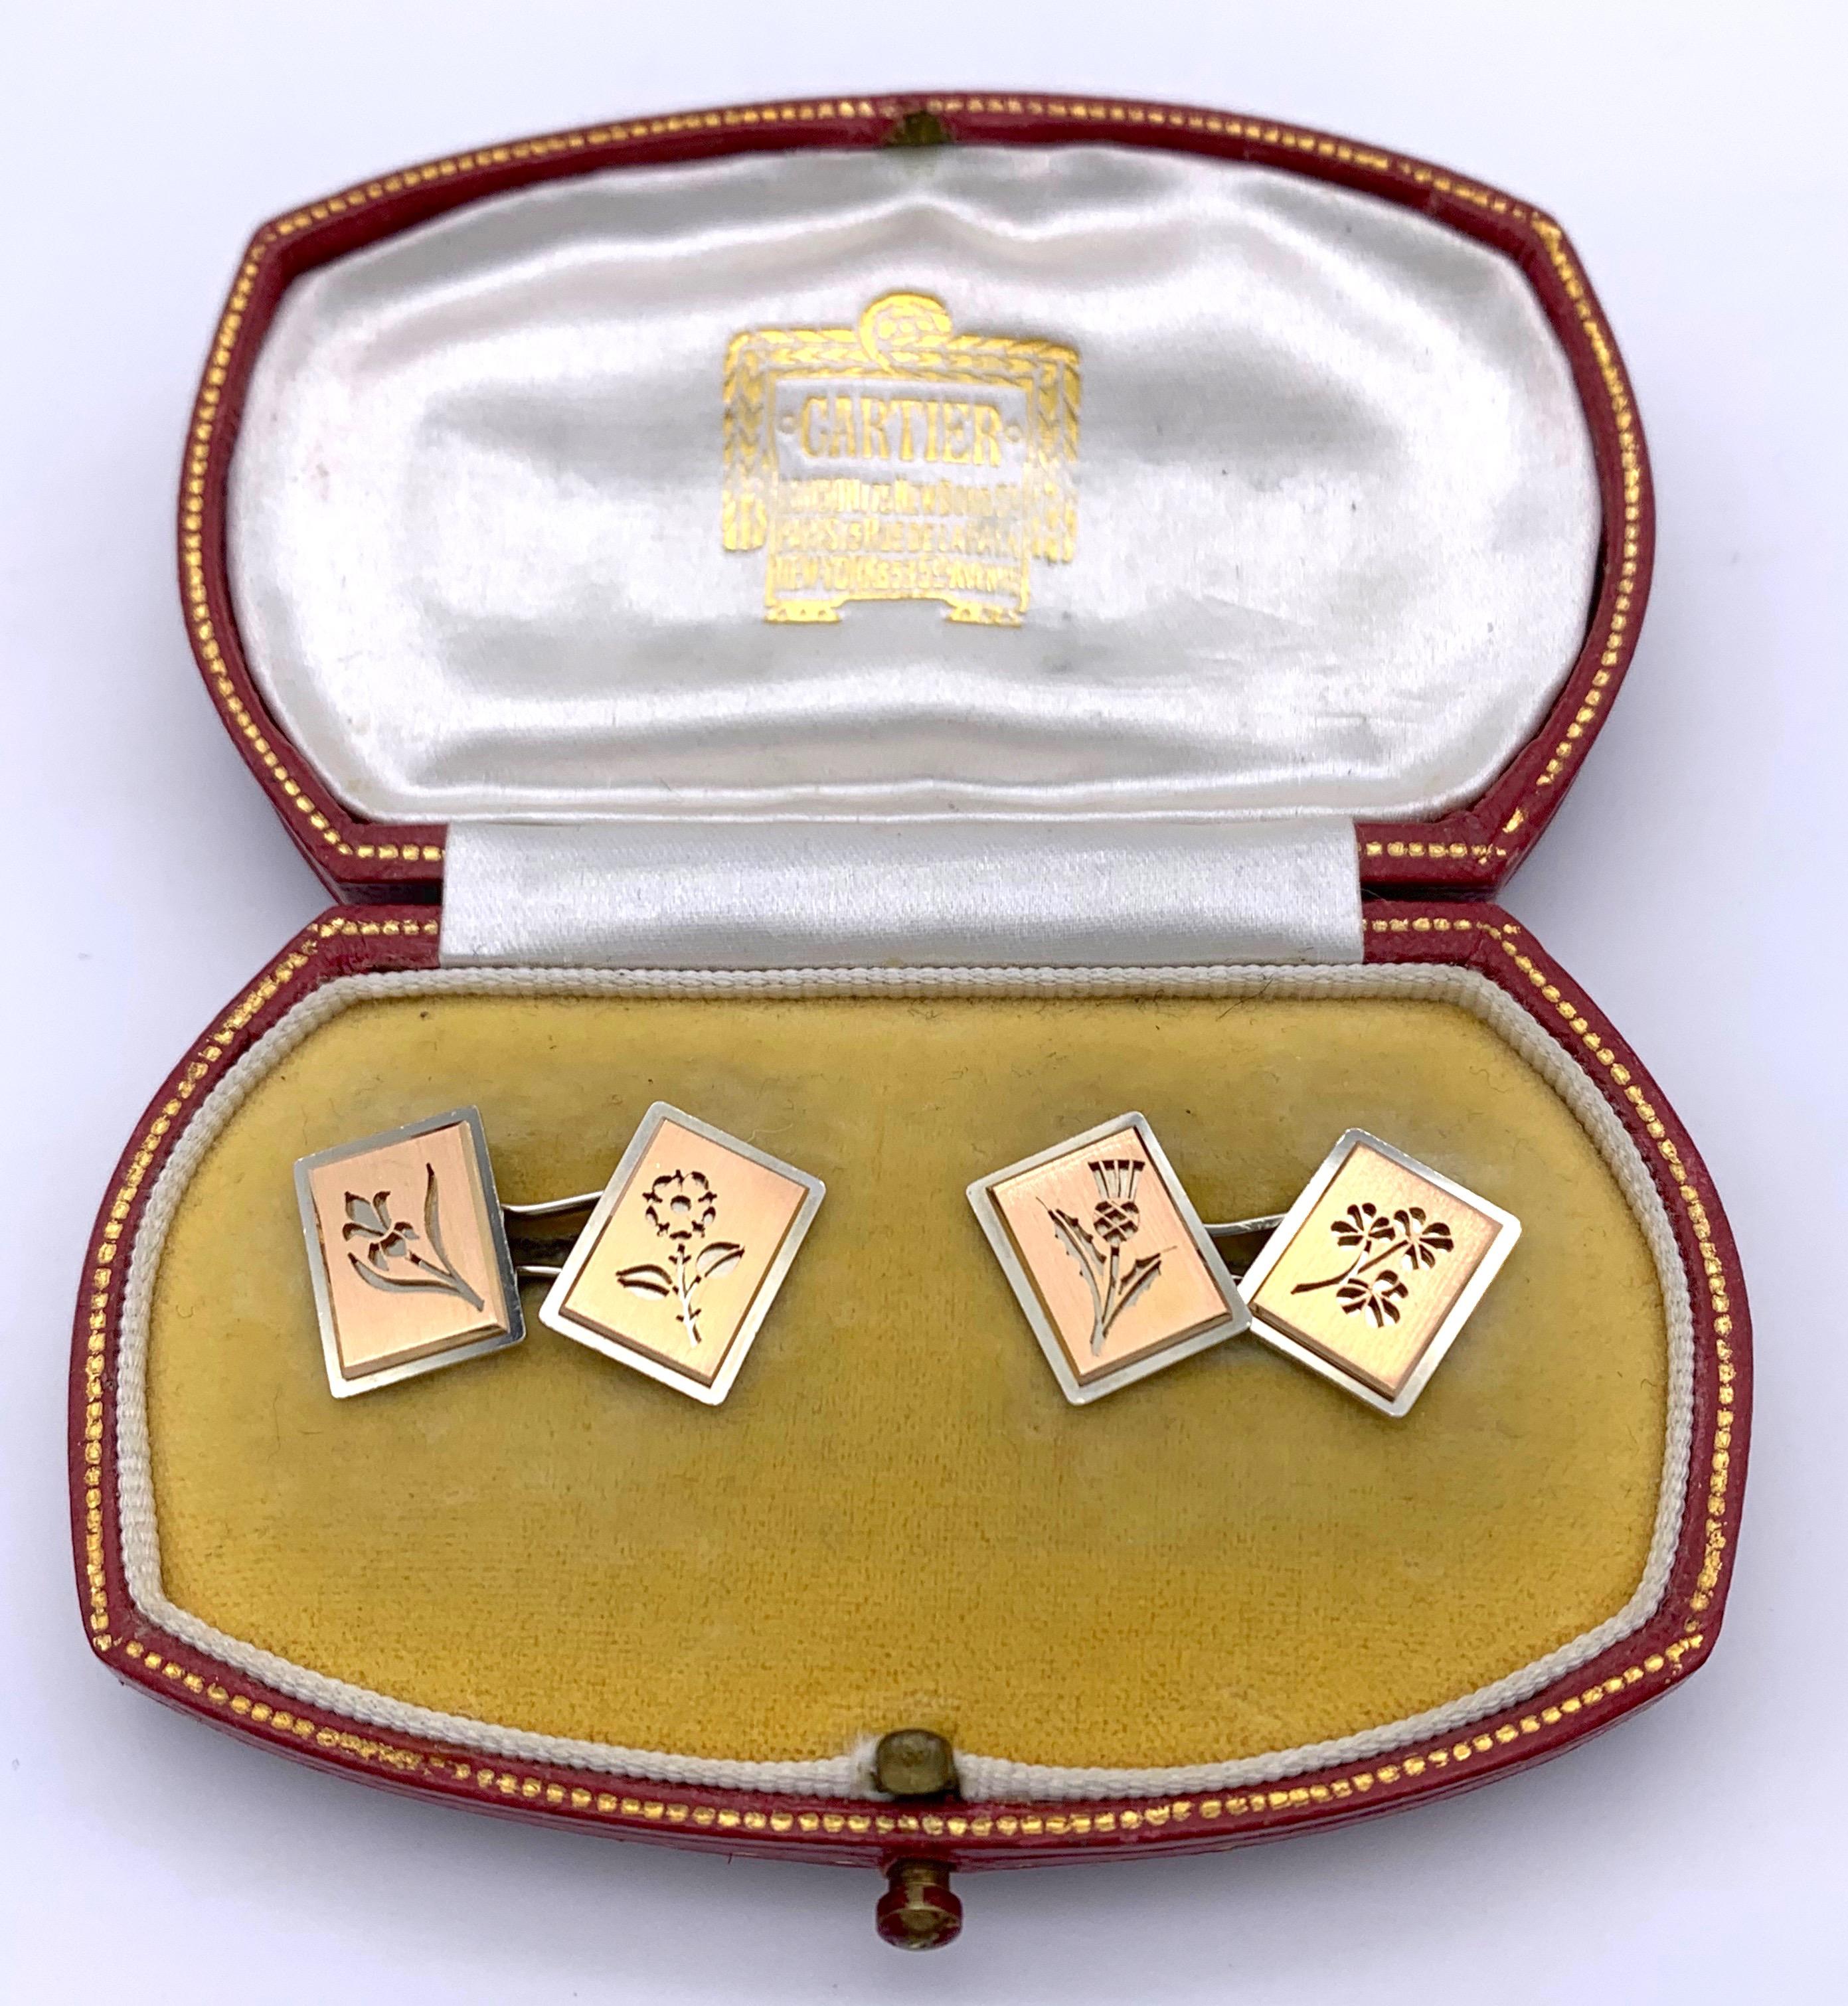 Highly attractive pair of rose and white gold cufflinks made around 1960 by Cartier Paris. 
The four red gold plates with bevelled edges feature four different silhouettes of flowers representing the United Kingdom of Great Britain. The thistle